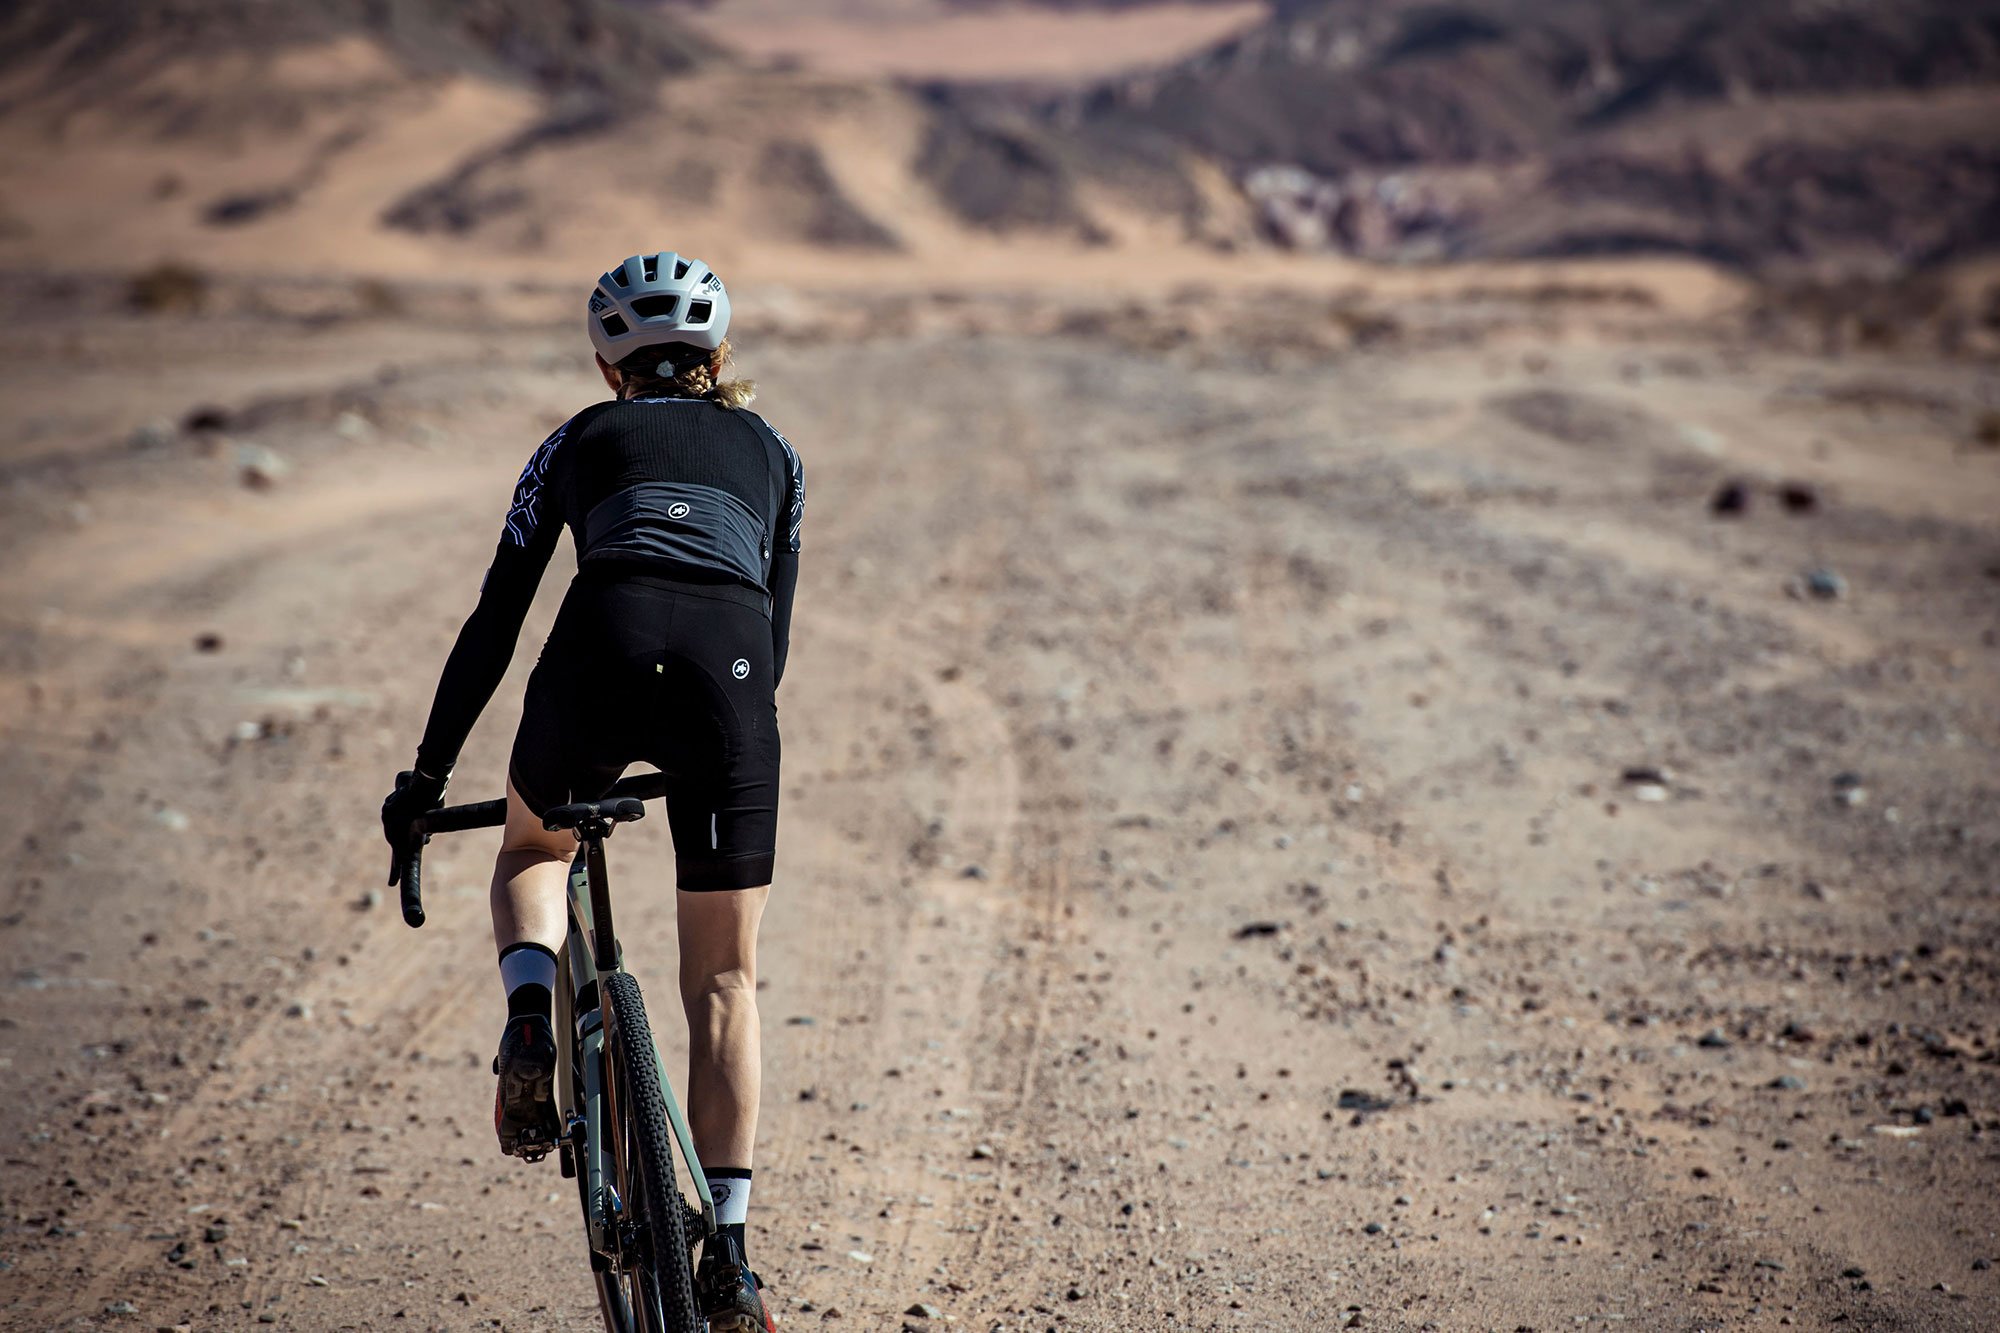 The MET Allroad is made for those who enjoy spending time on gravel routes.